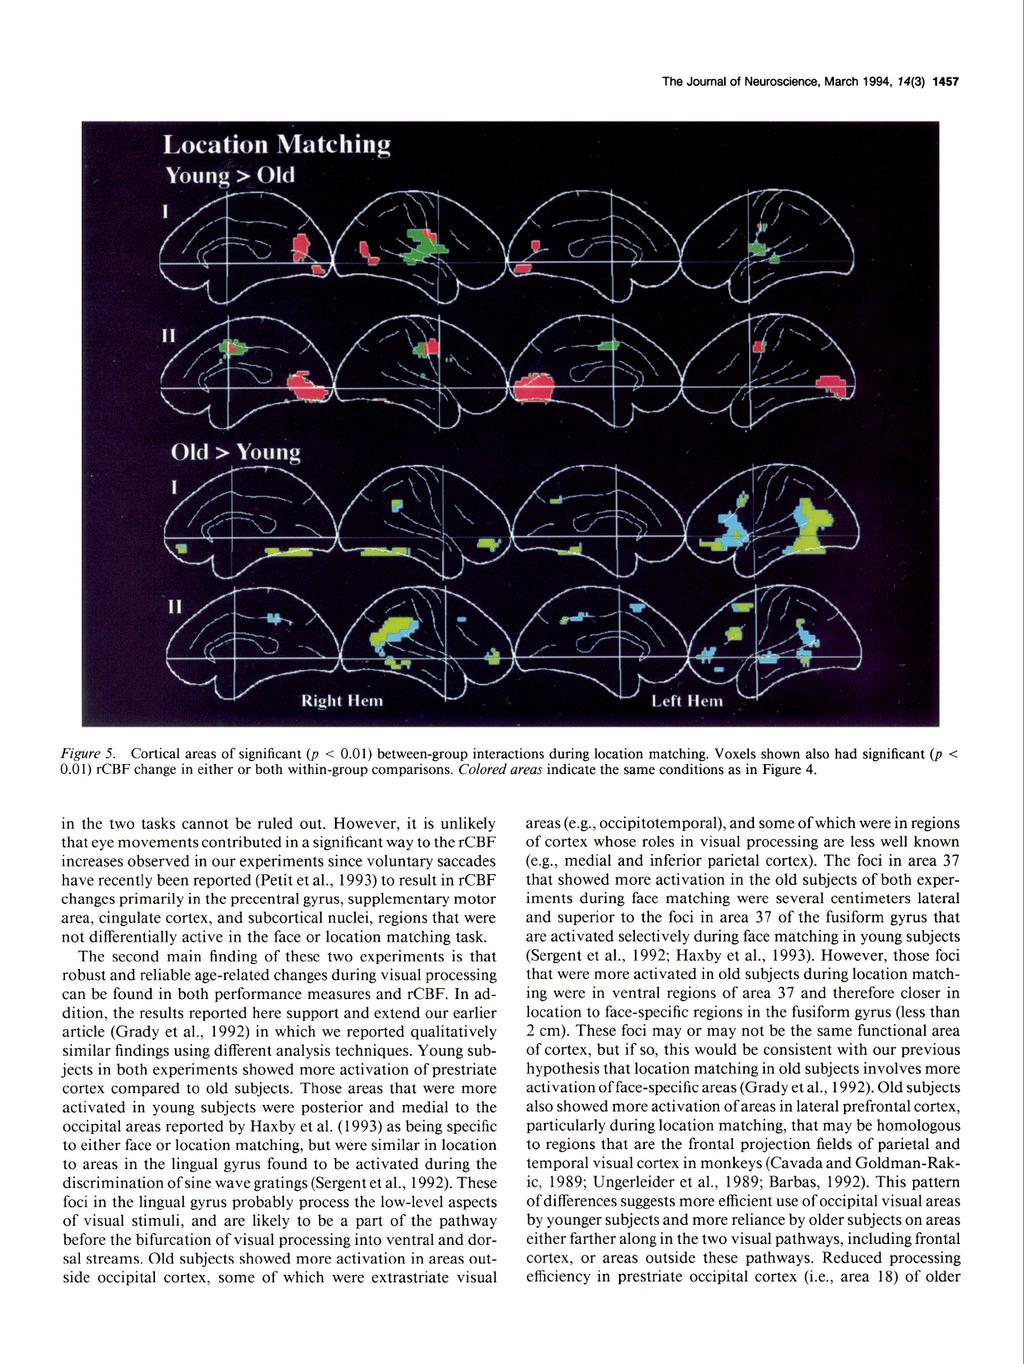 The Journal Location Young of Neuroscience, March 1994, 14(3) 1457 Matching > Old Fzgure 5. Cortical areas of significant (p < 0.01) between-group interactions during location matching.